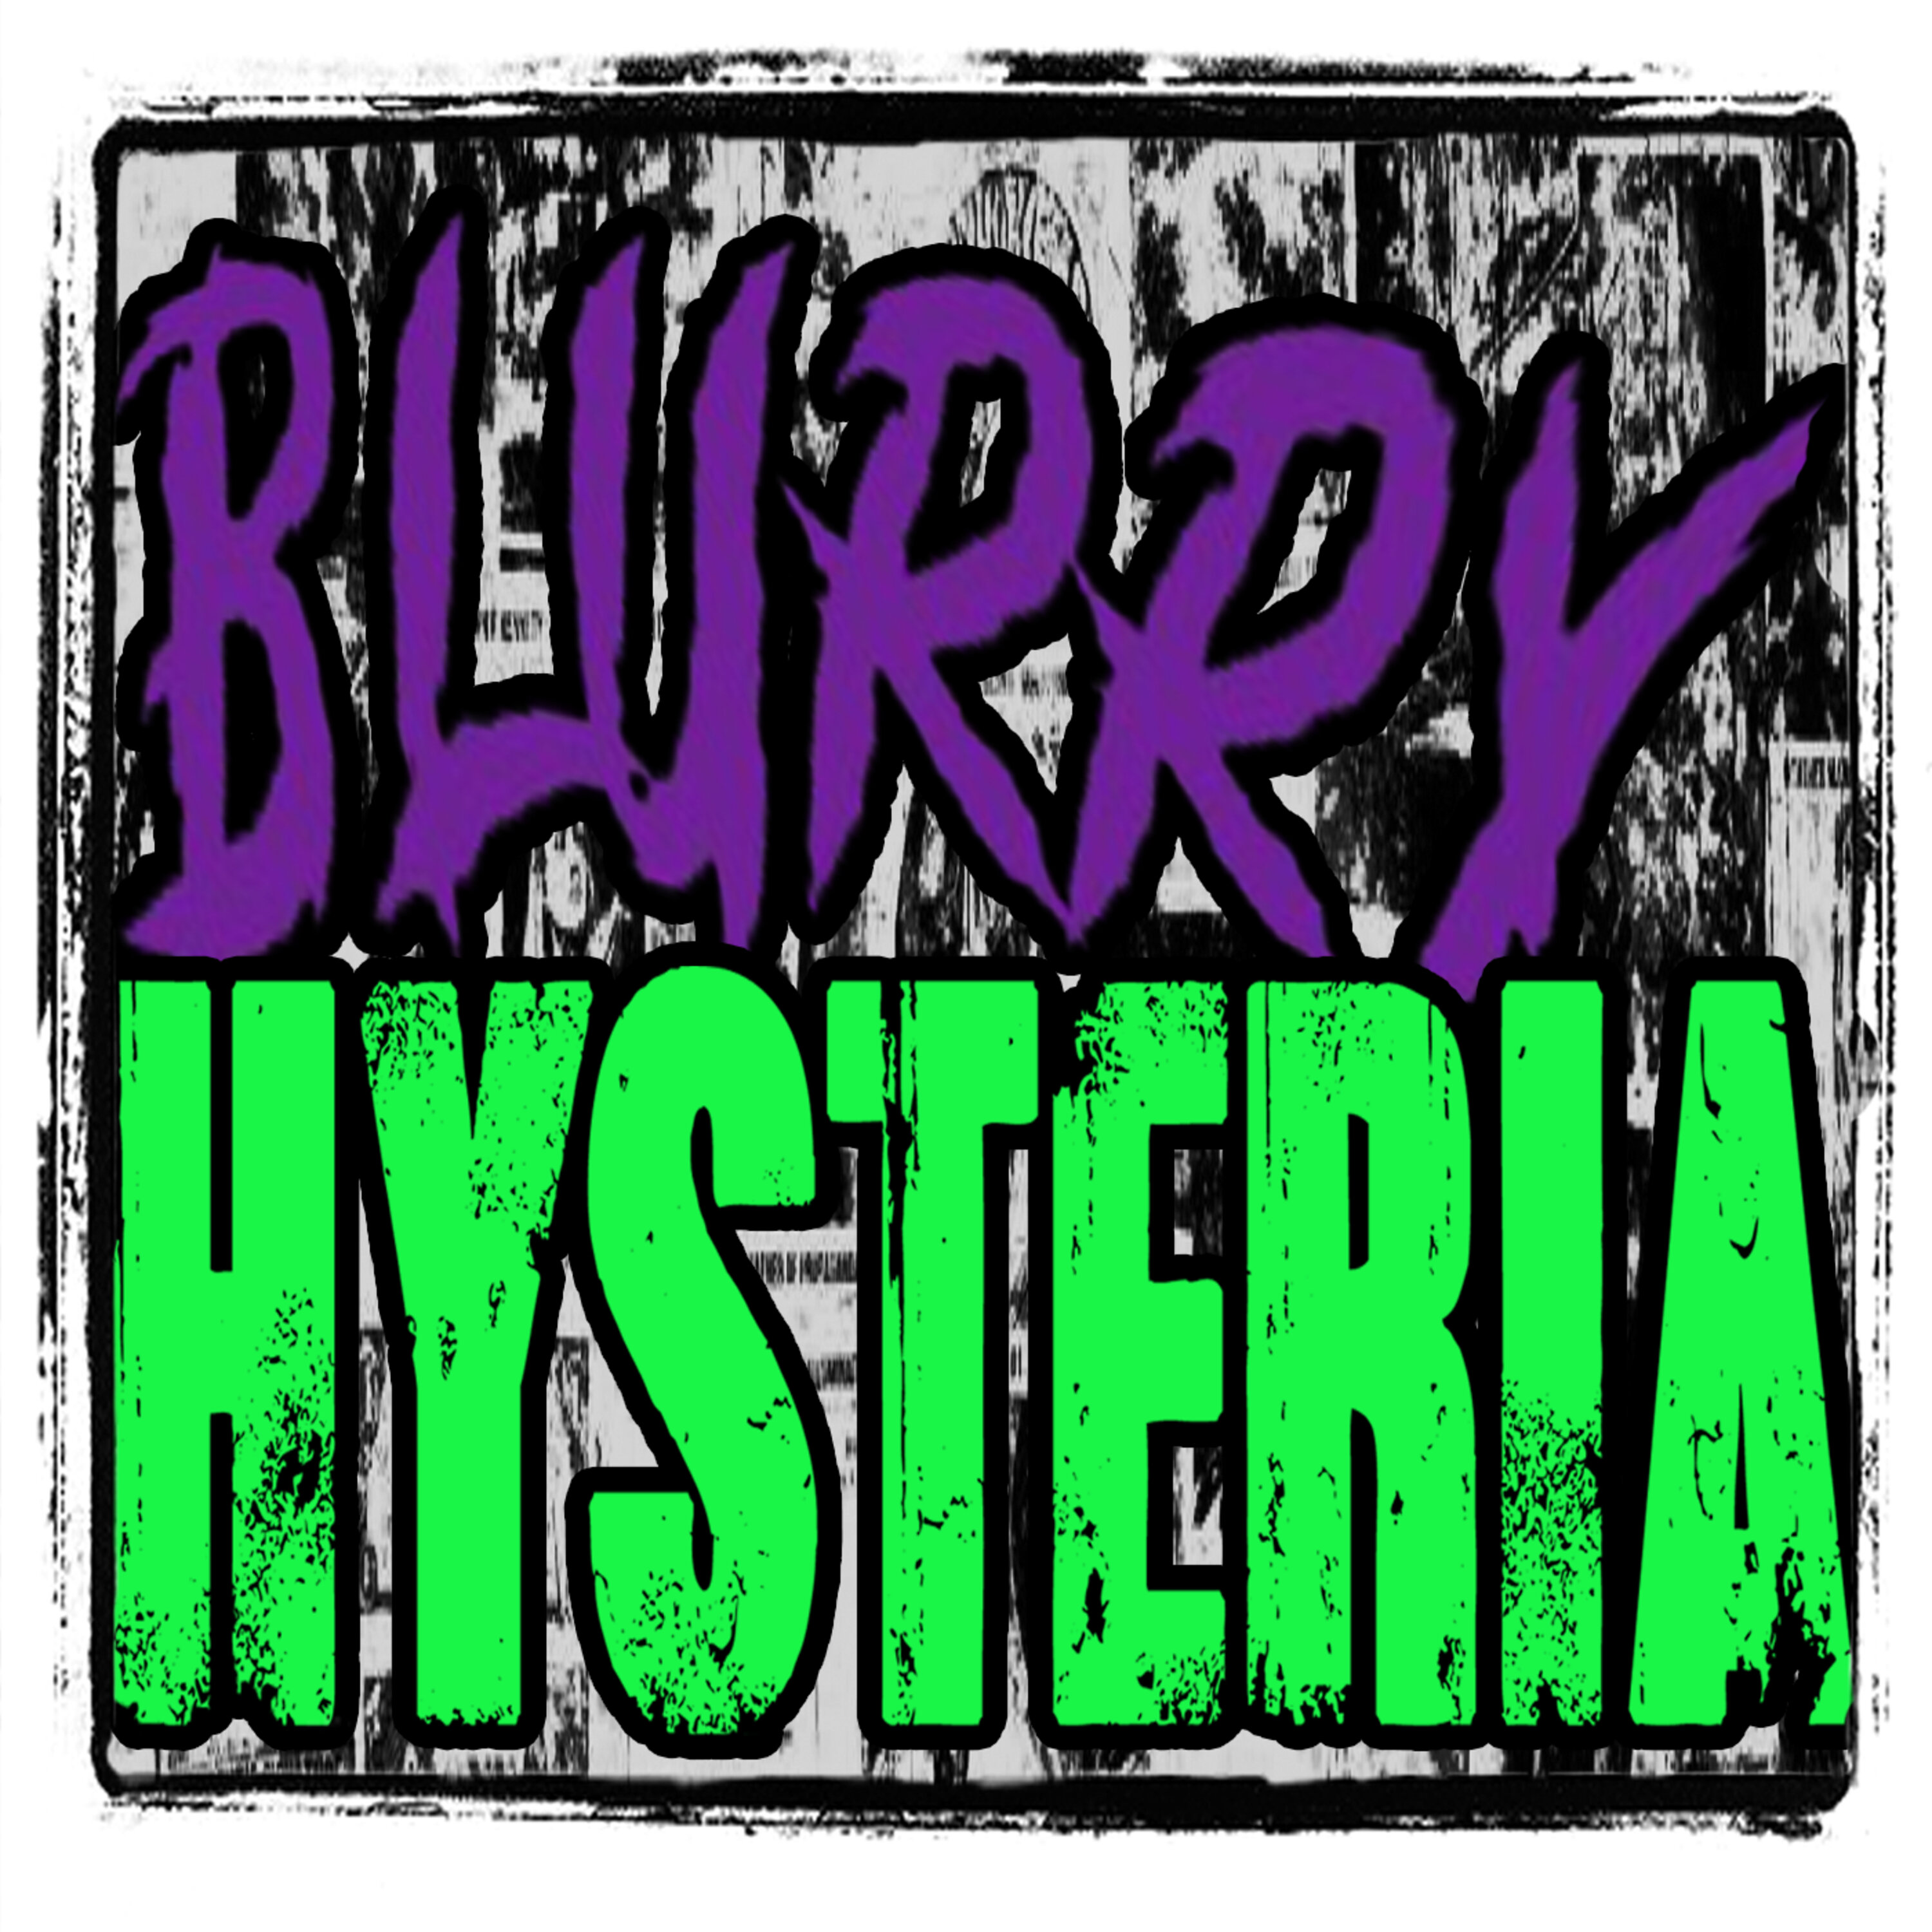 Blurry Hysteria 12: Long Lost City of Butt-Breathing | BONUS Image